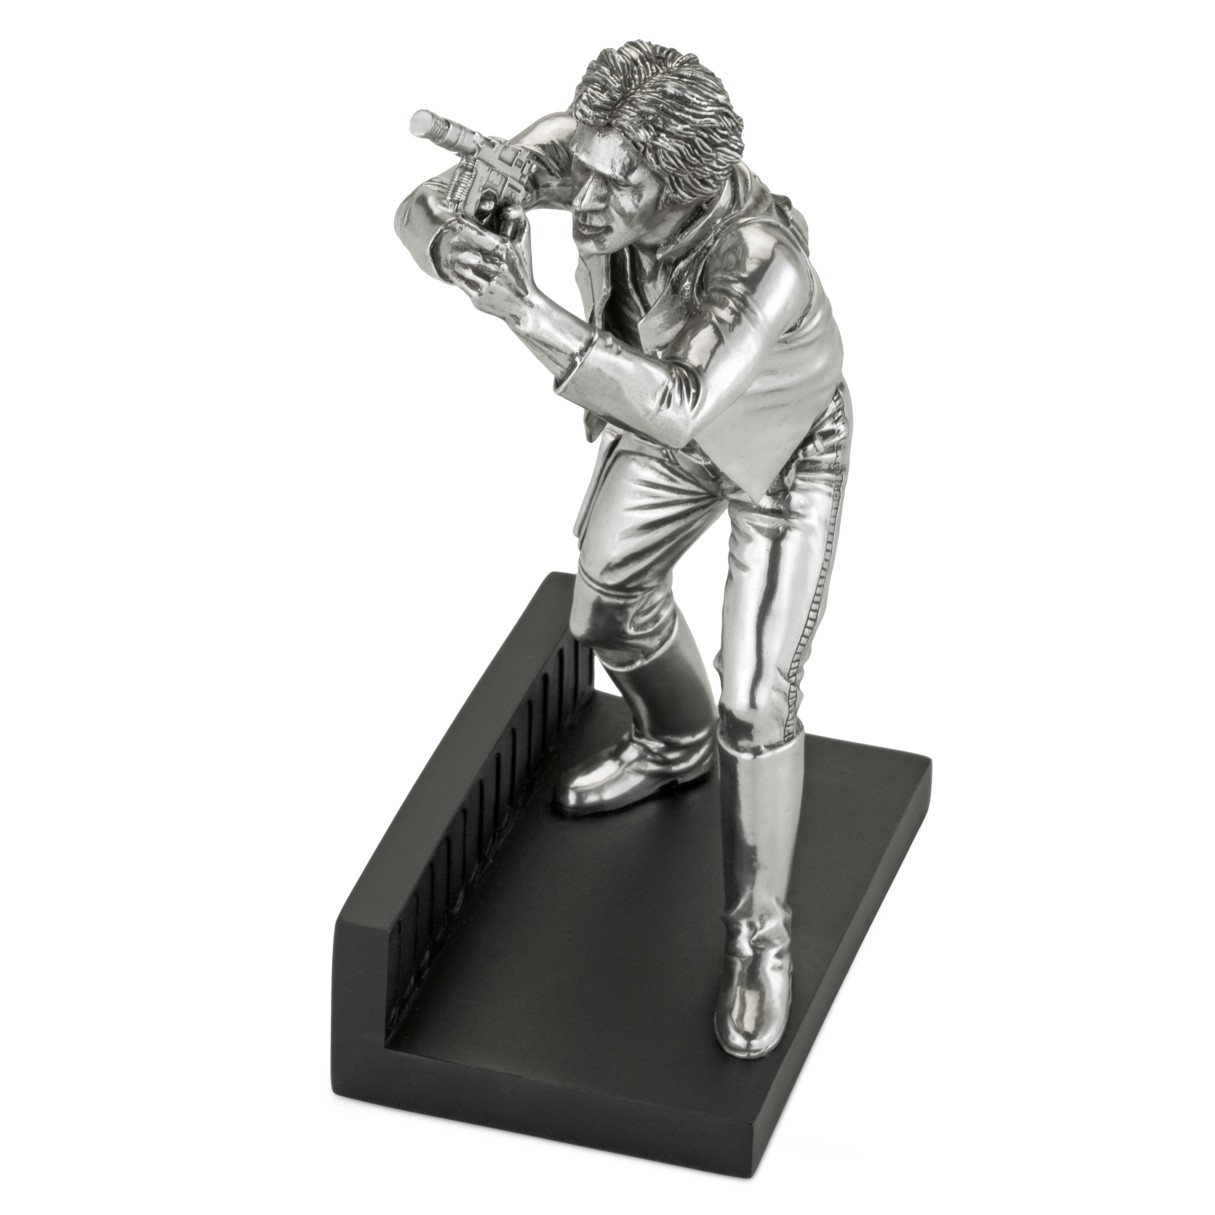 Han Solo Pewter Figurine by Royal Selangor – Star Wars – Limited Edition